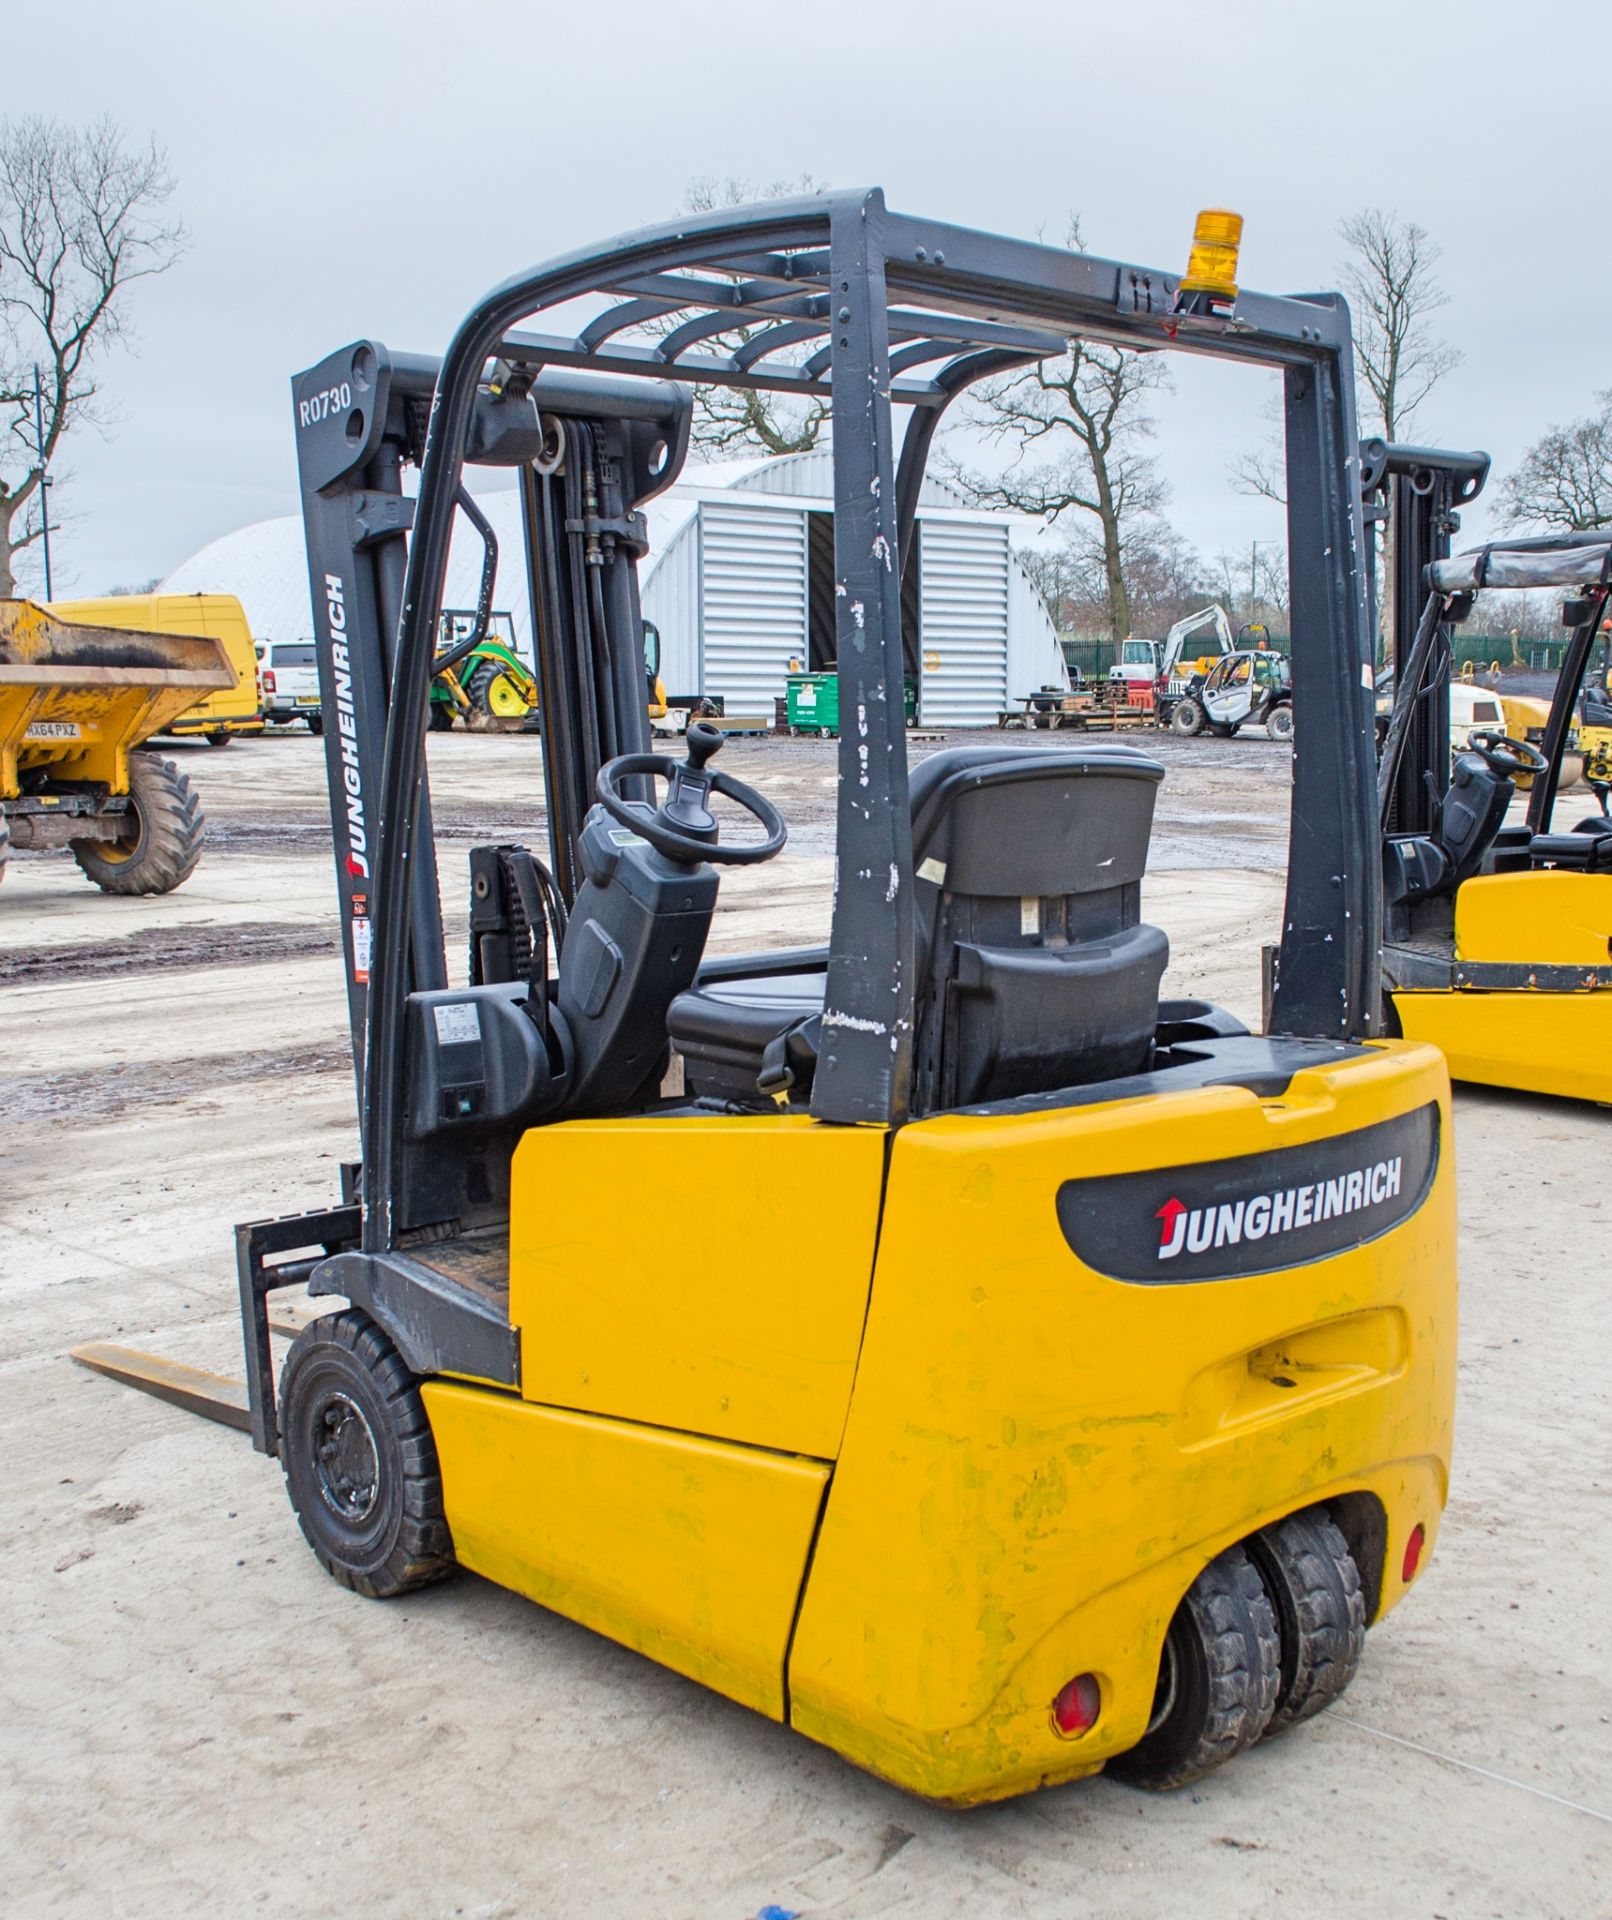 Jungheinrich EFGDF-13-4500DZ battery electric fork lift truck Year: 2001 S/N: 89918168 c/w battery - Image 4 of 14